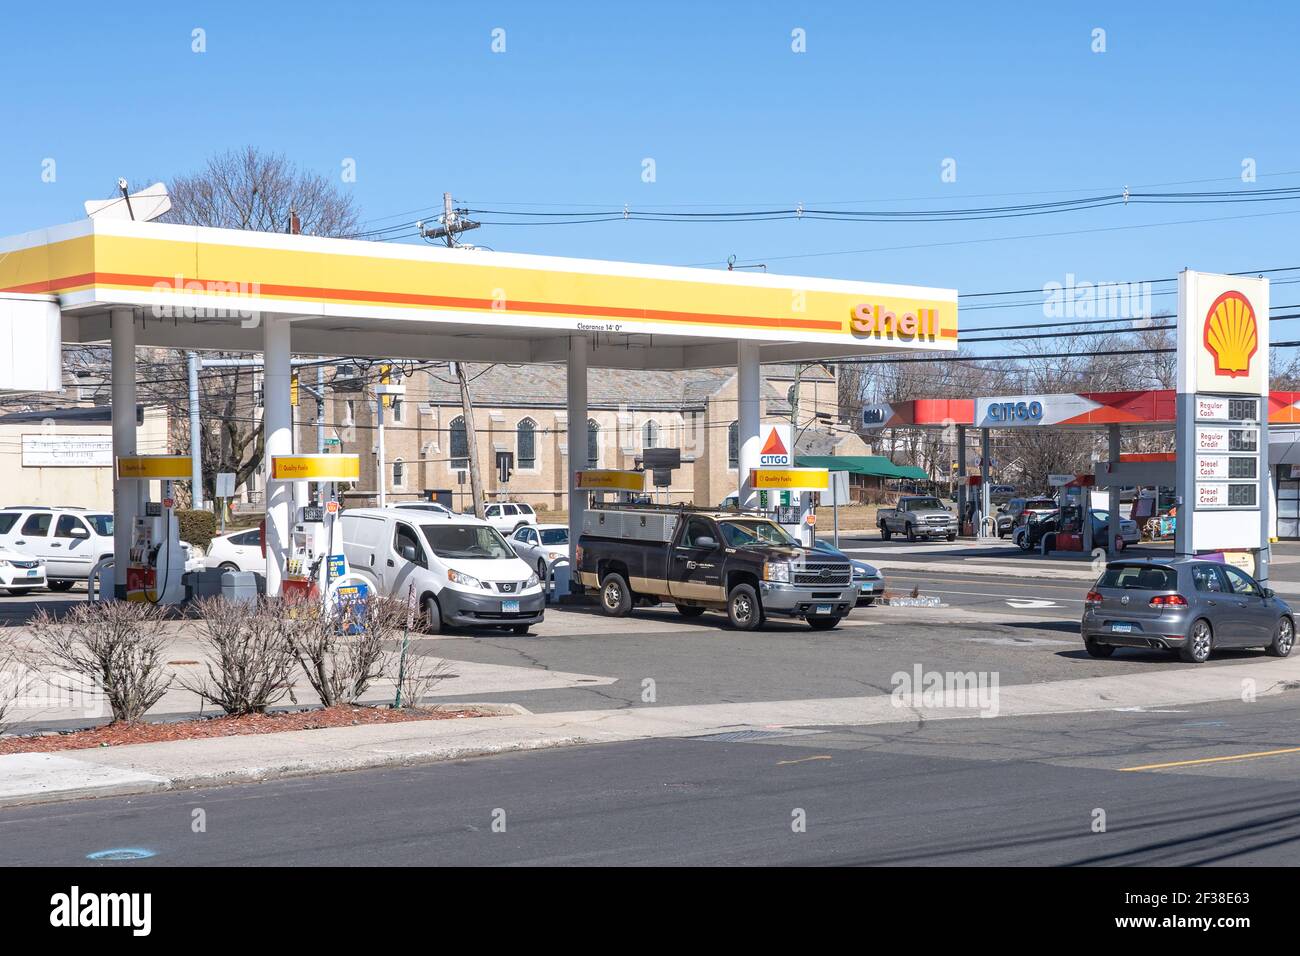 NEW YORK, NY - MARCH 15: A view of Shell and Citgo gas stations on March 15, 2021 in Norwalk, Connecticut.   Oil and gasoline prices were rebounding after last year's collapse in fuel demand and prices. According to the AAA motor club gas prices have risen about 35 cents a gallon on average over the last month and could reach $4 a gallon in some states by summer. Credit: Ron Adar/Alamy Live News Stock Photo